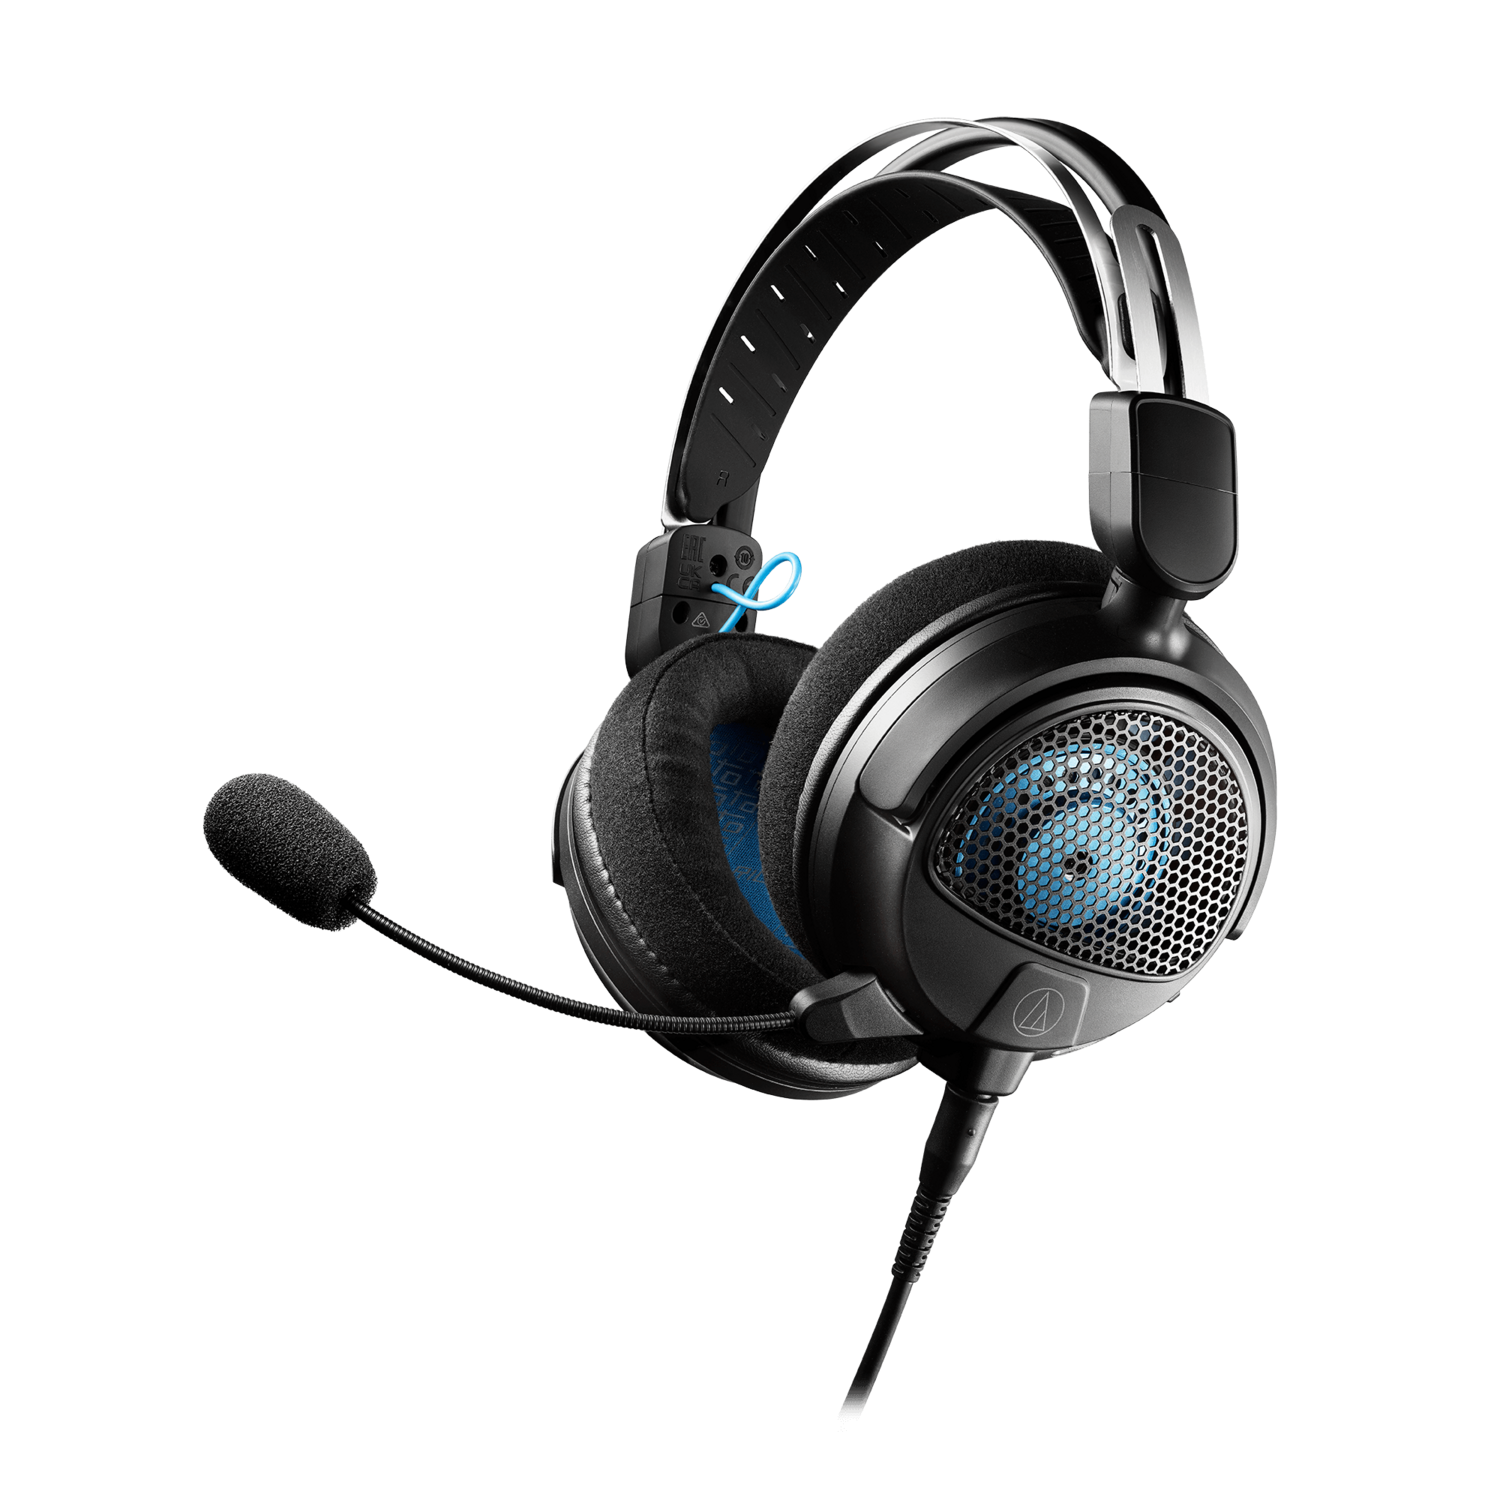 Audio Technica High-Fidelity Open-Back Gaming Headset
ATH-GDL3